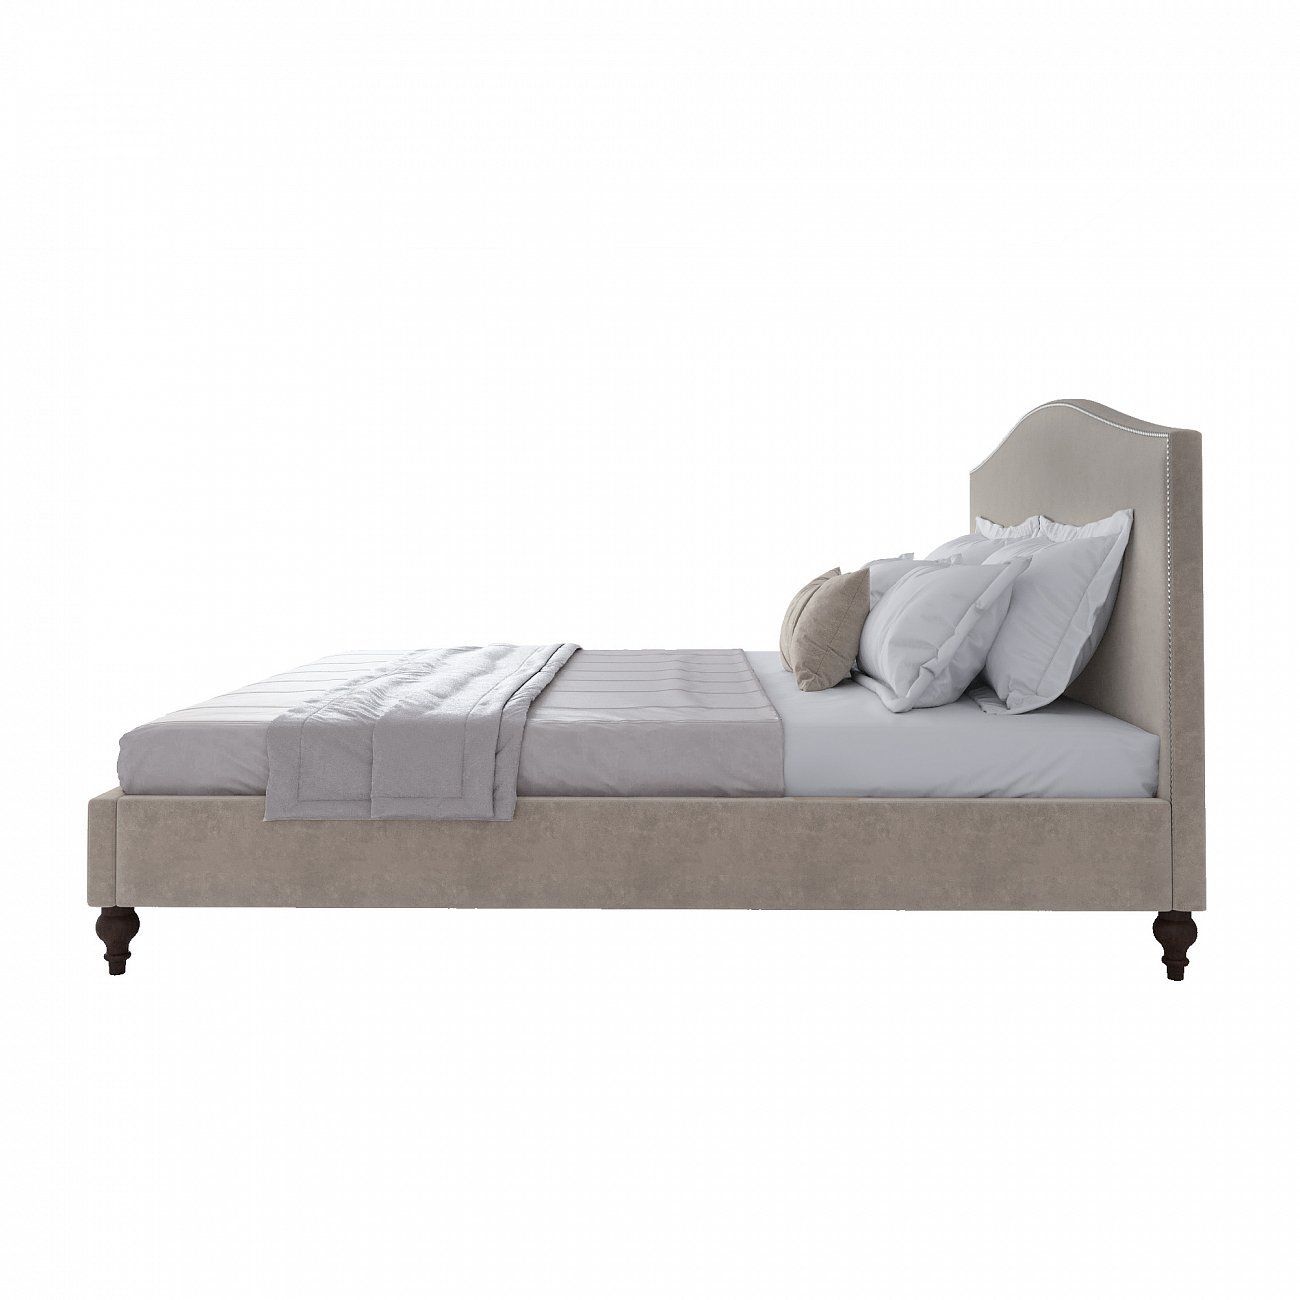 Double bed with upholstered headboard 180x200 cm beige Fleurie